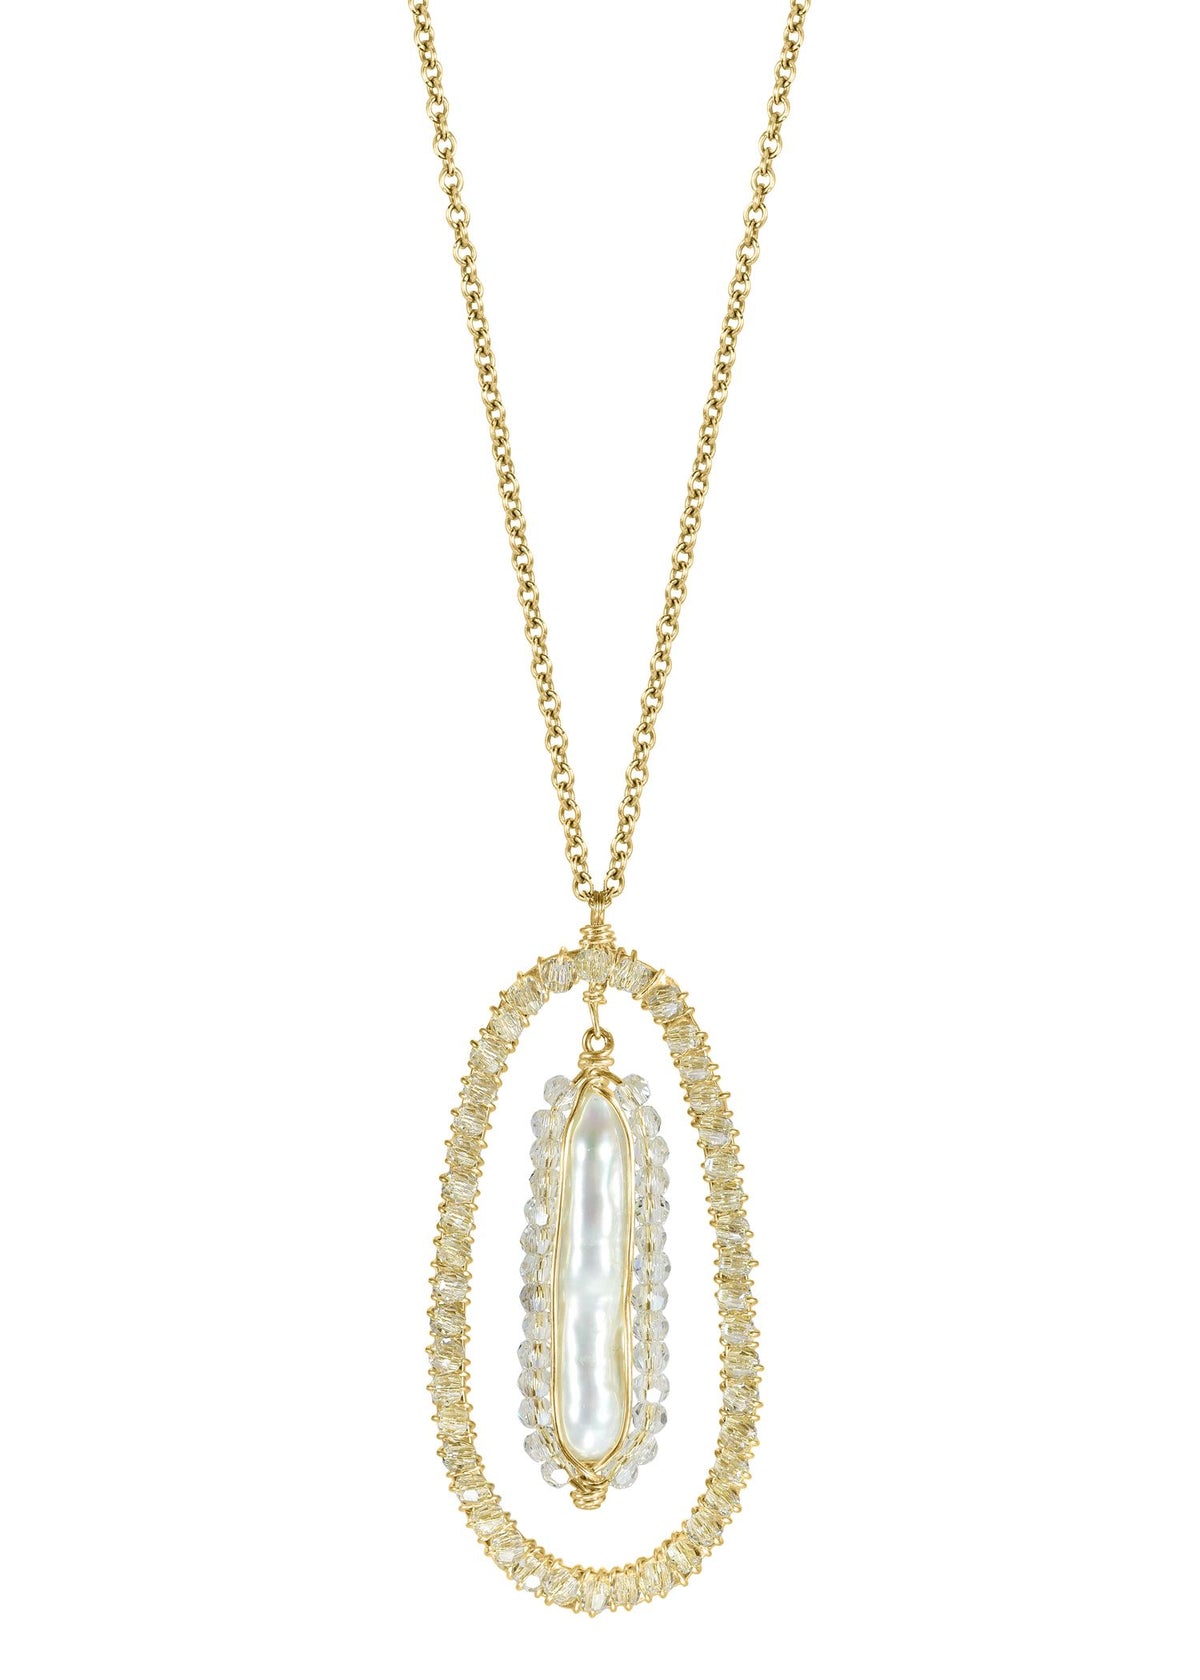 Fresh water pearl Crystal 14k gold fill Necklace measures 18” in length Pendant measures 1-3/8” in length and 11/16” in width Handmade in our Los Angeles studio